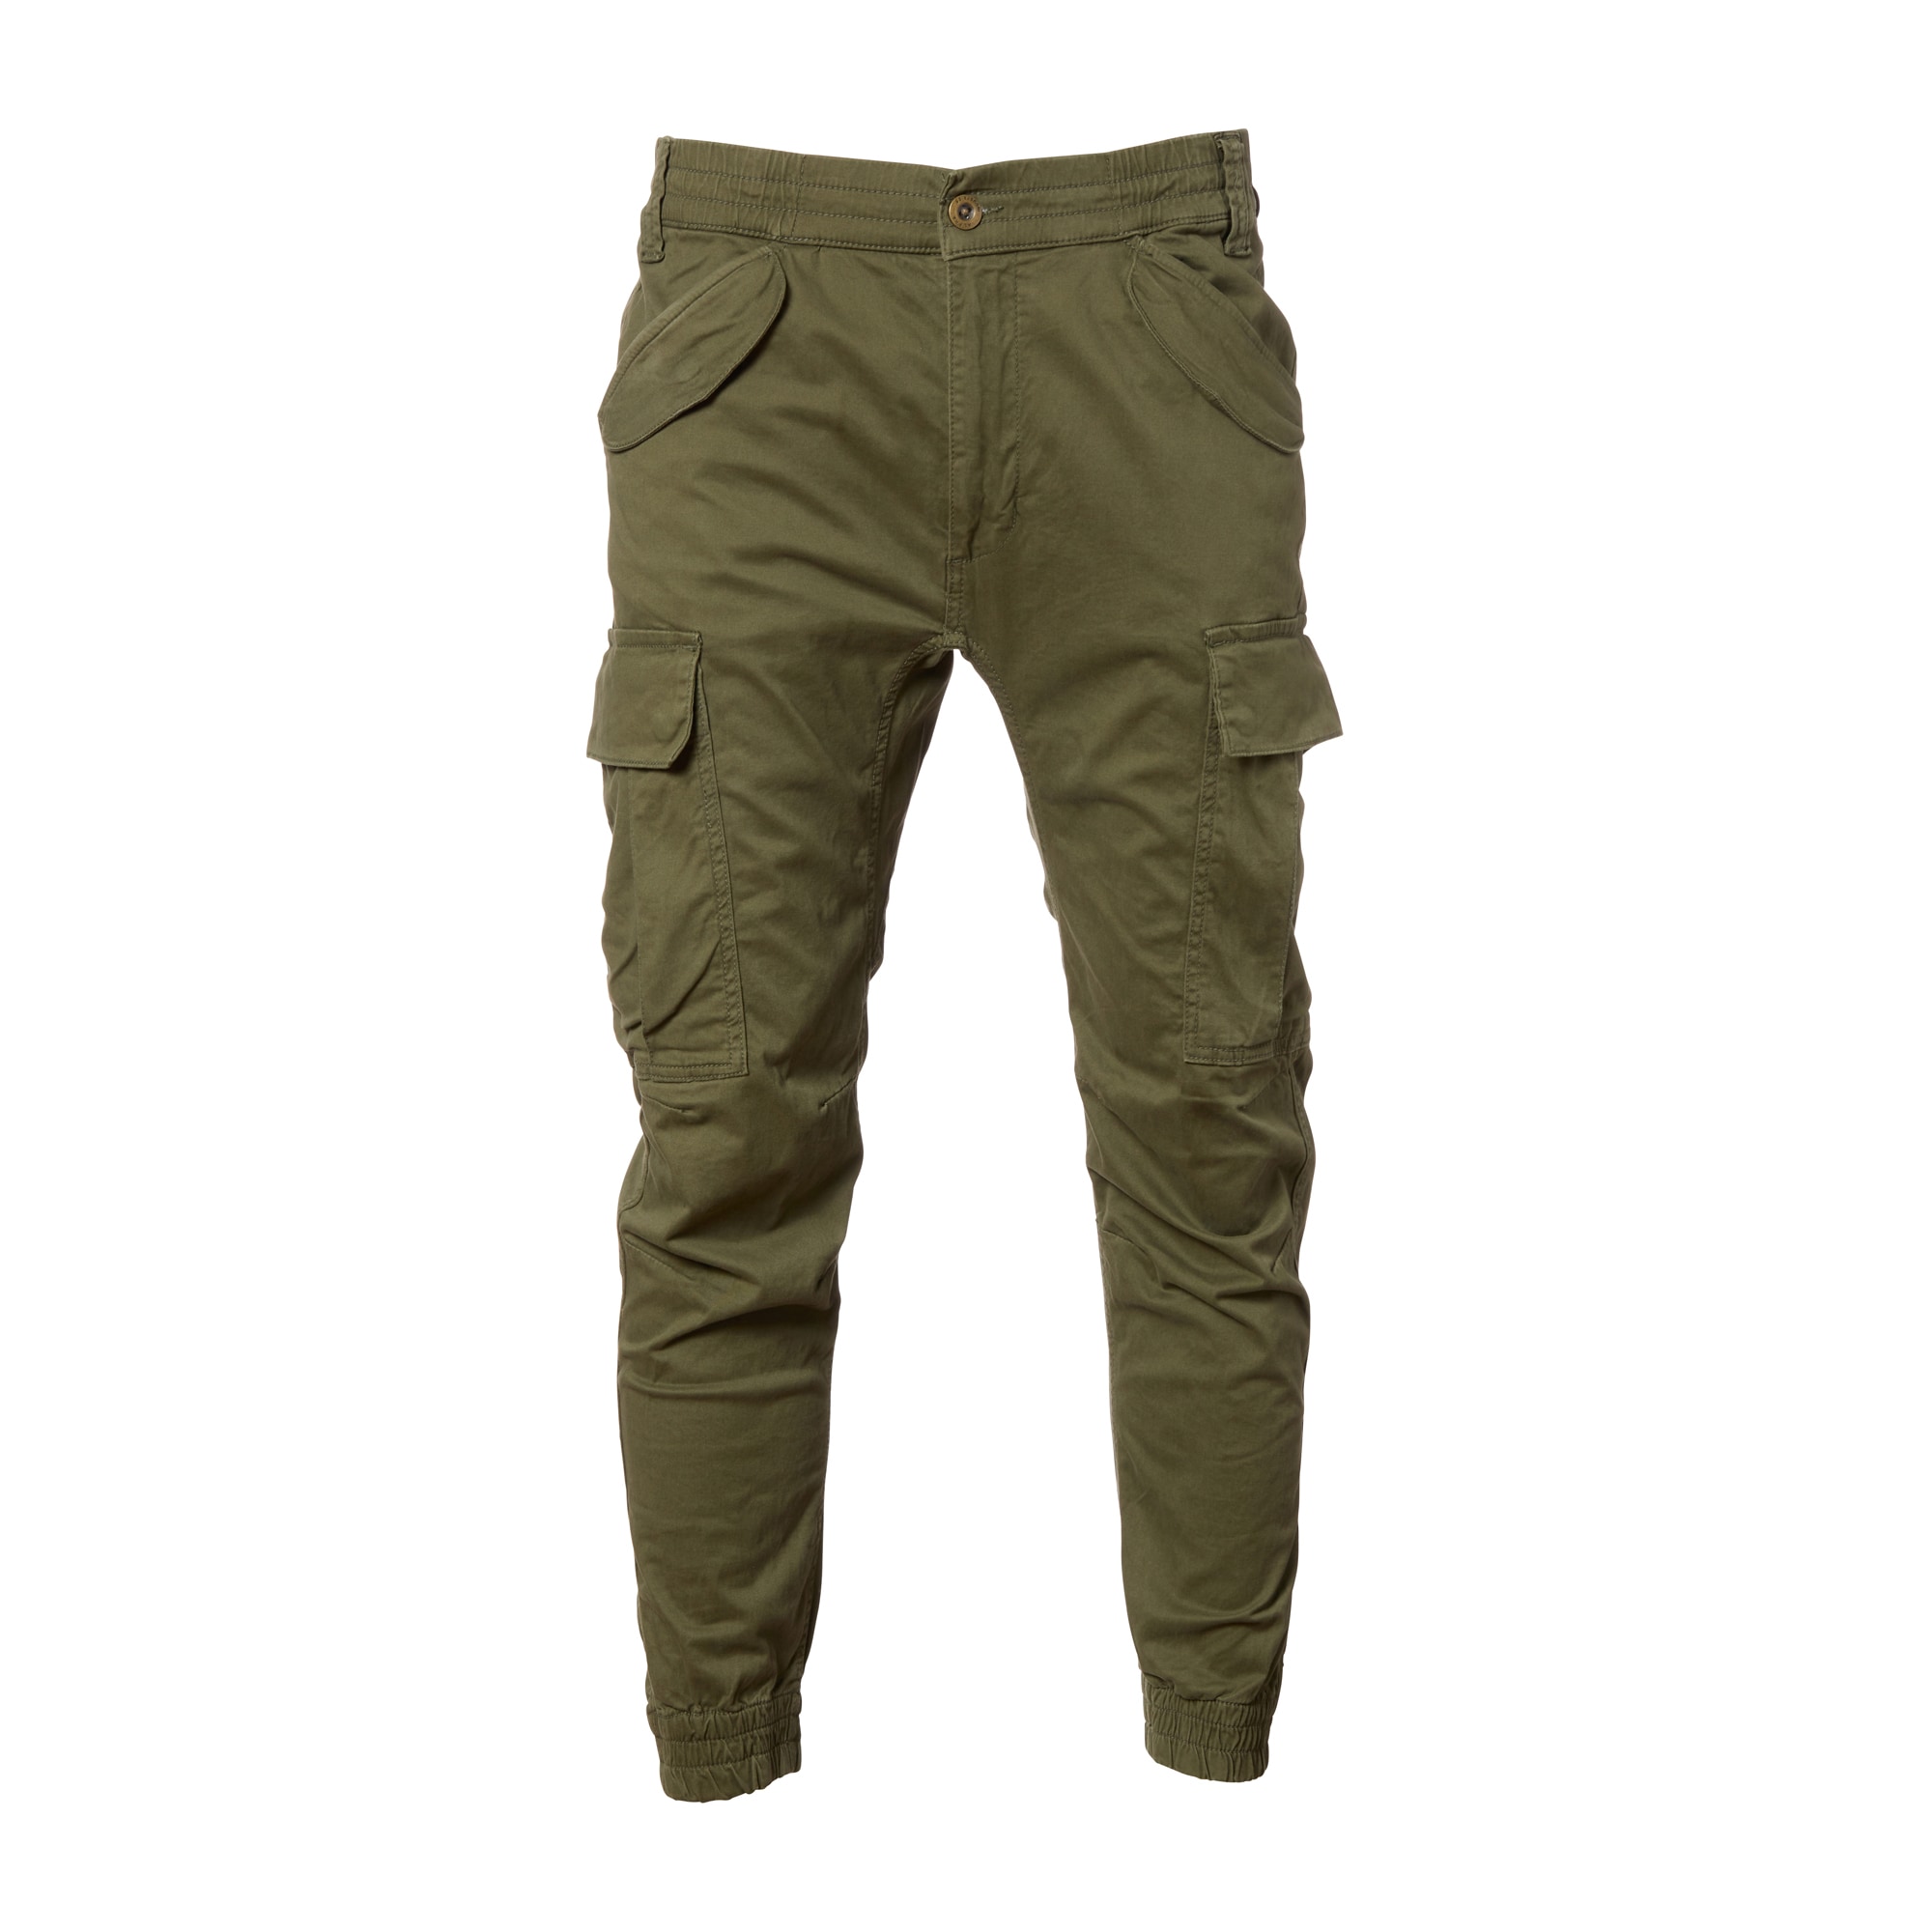 Pants Industries ASMC Airman Alpha the by olive dark Purchase